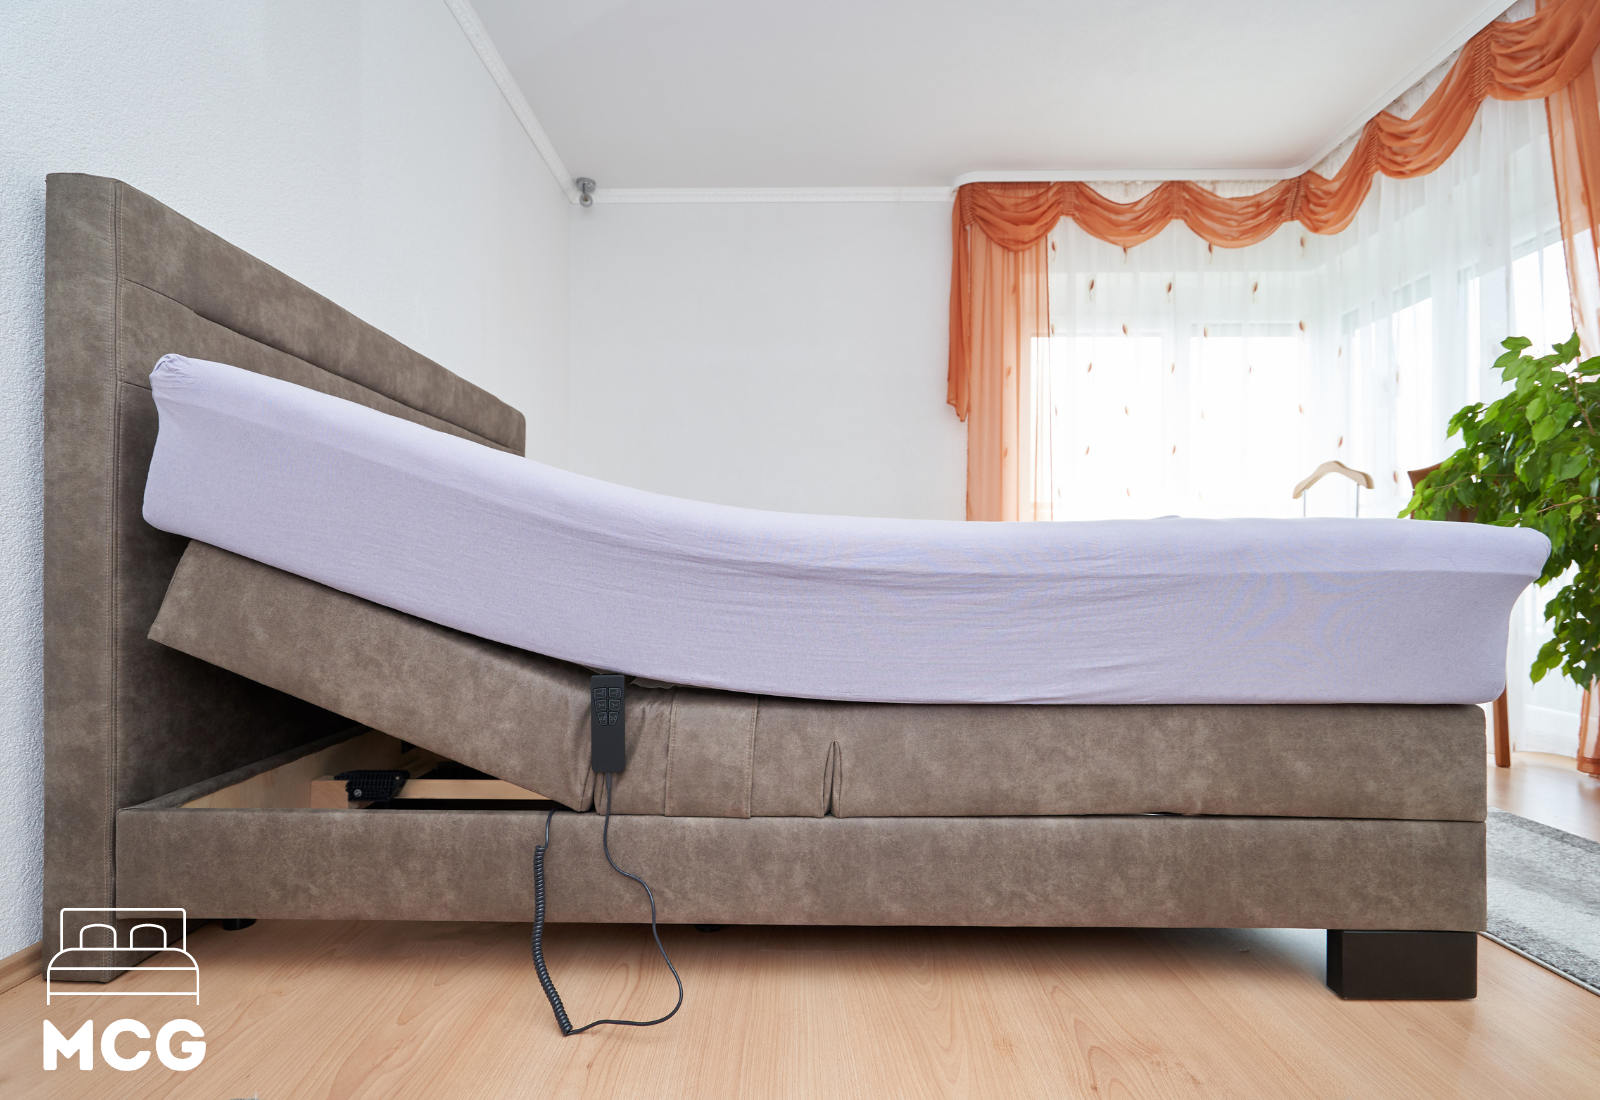 picture of an adjustable bed